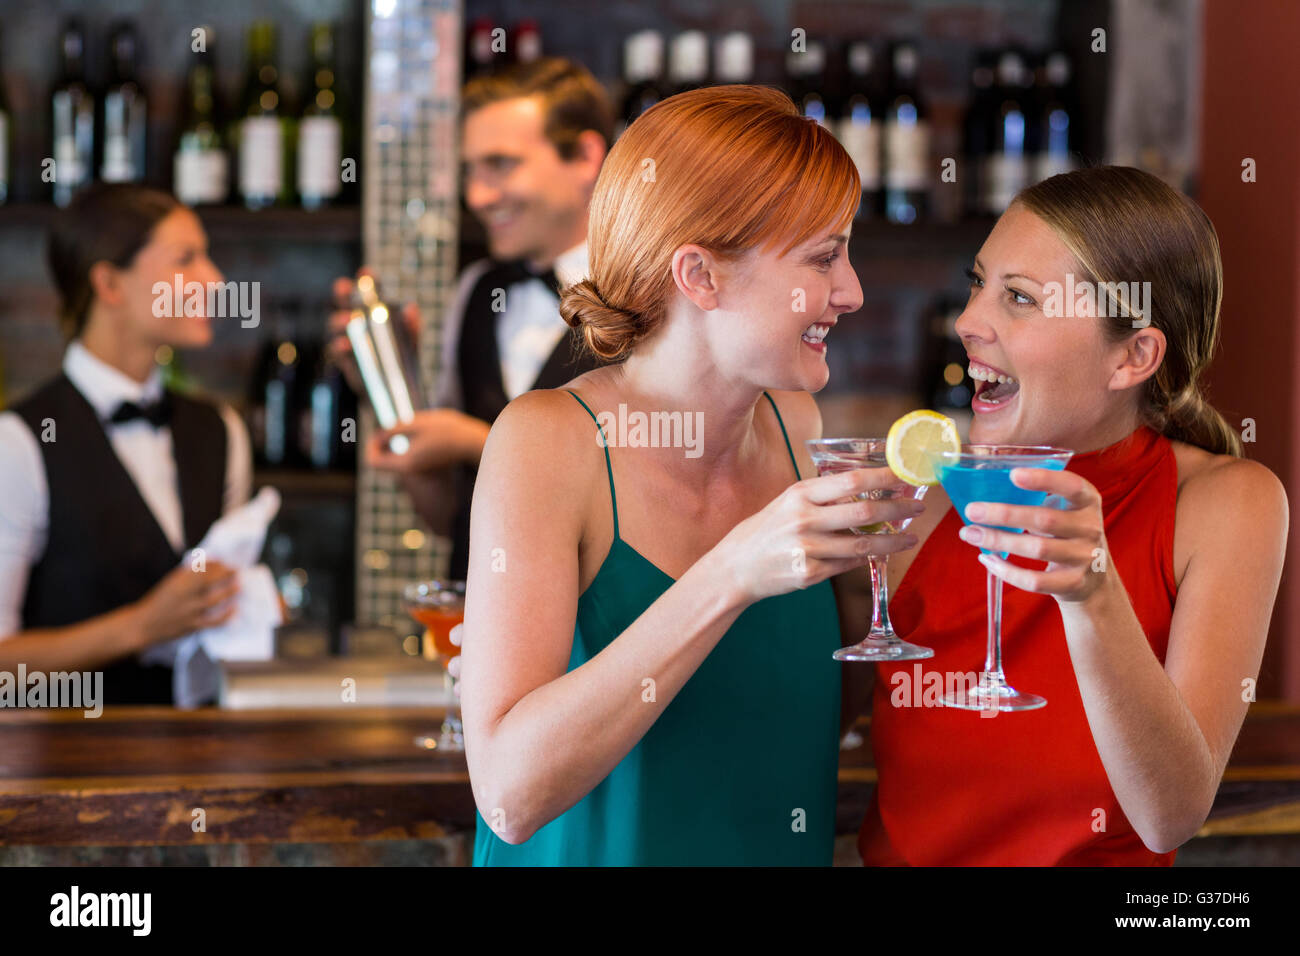 Friends holding a cocktail in front of bar counter Stock Photo